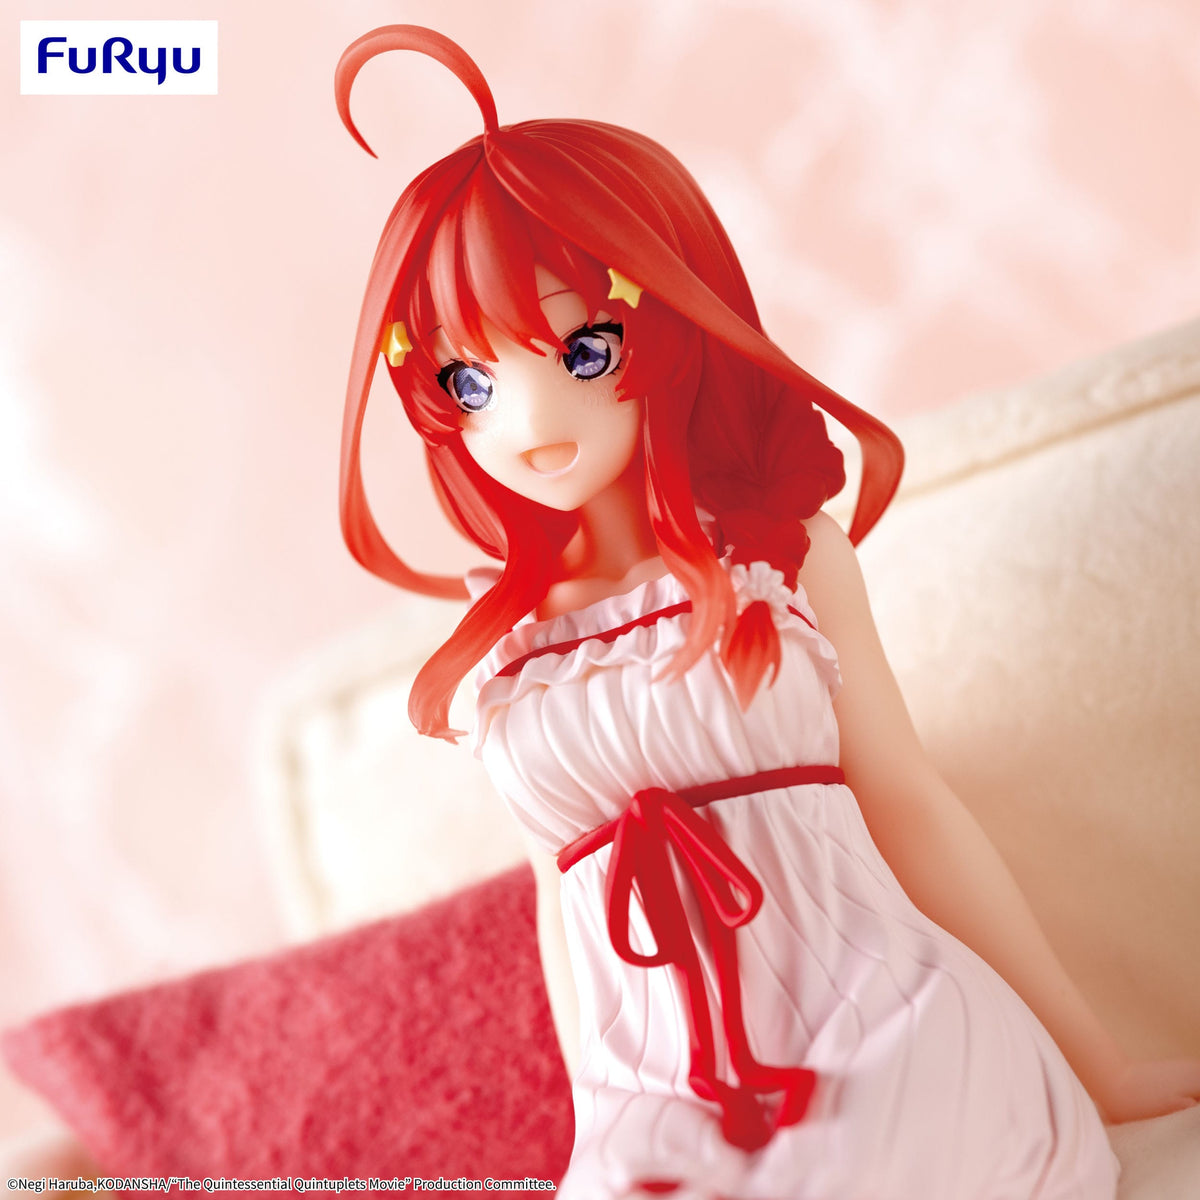 The Quintessential Quintuplets - Itsuki Nakano - Loungewear Noodle Stopper Figur (Furyu)